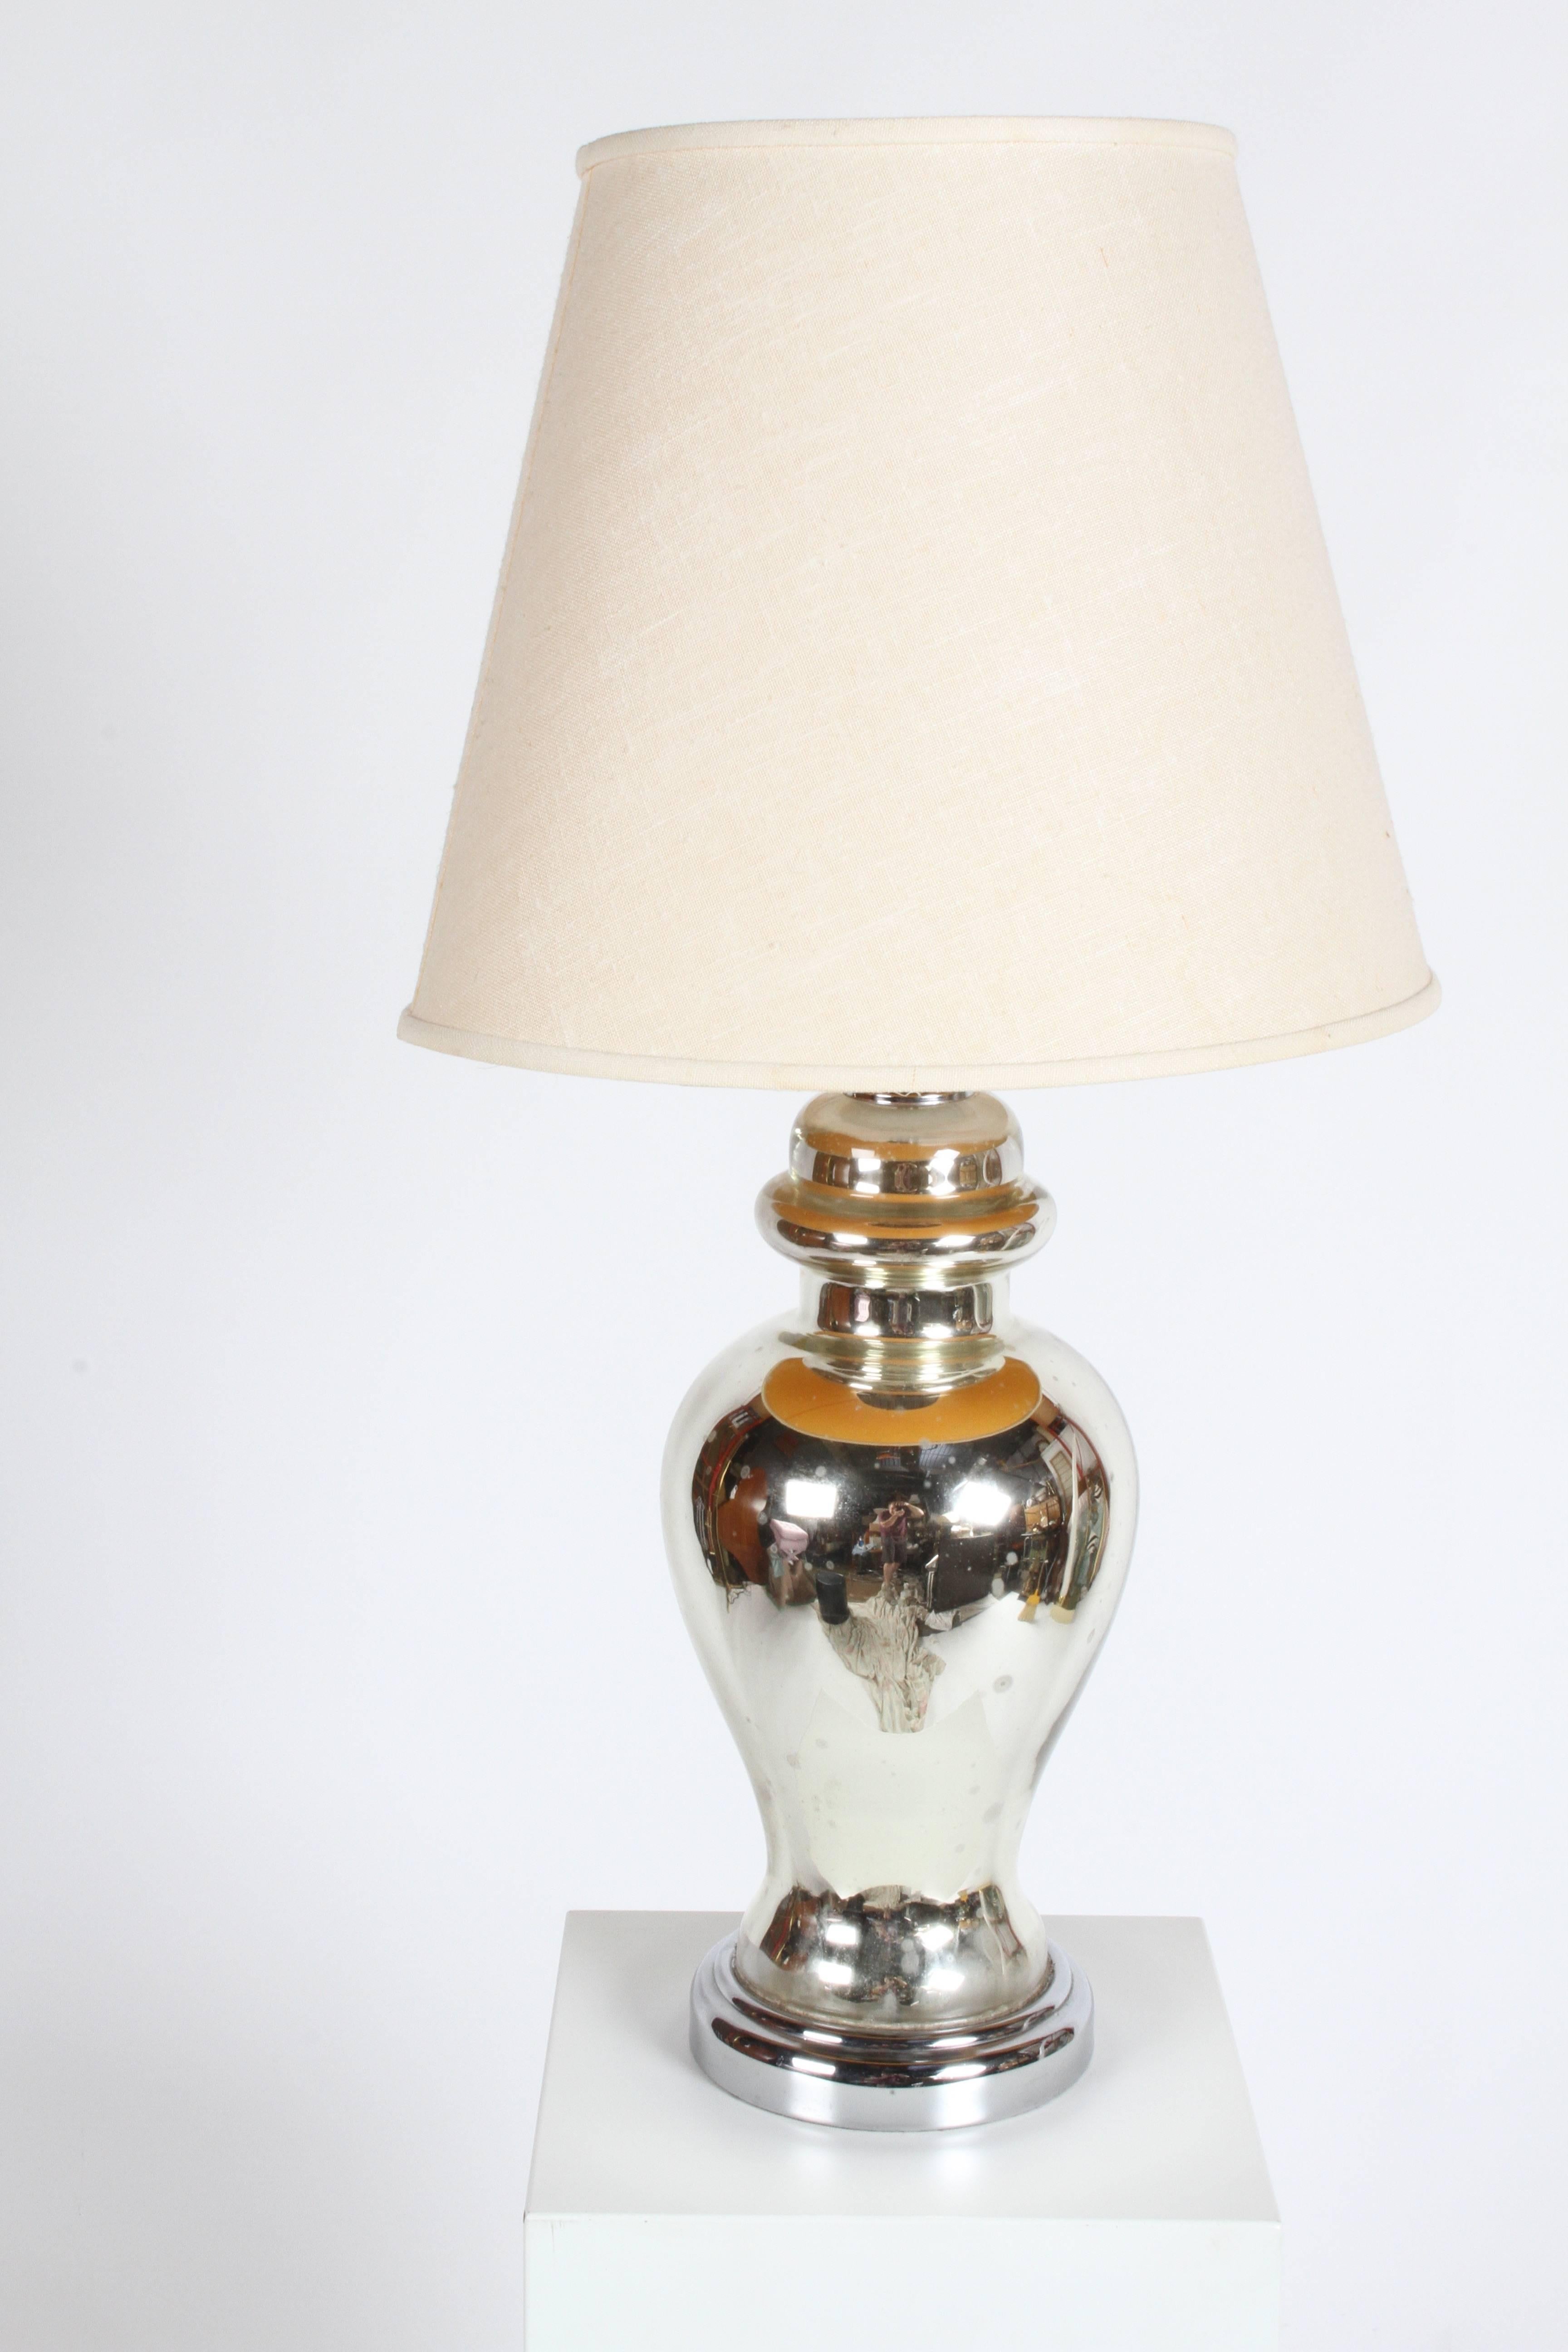 Pair of Mid-Century Classical Urn Form Mercury Glass Table Lamps In Good Condition For Sale In St. Louis, MO